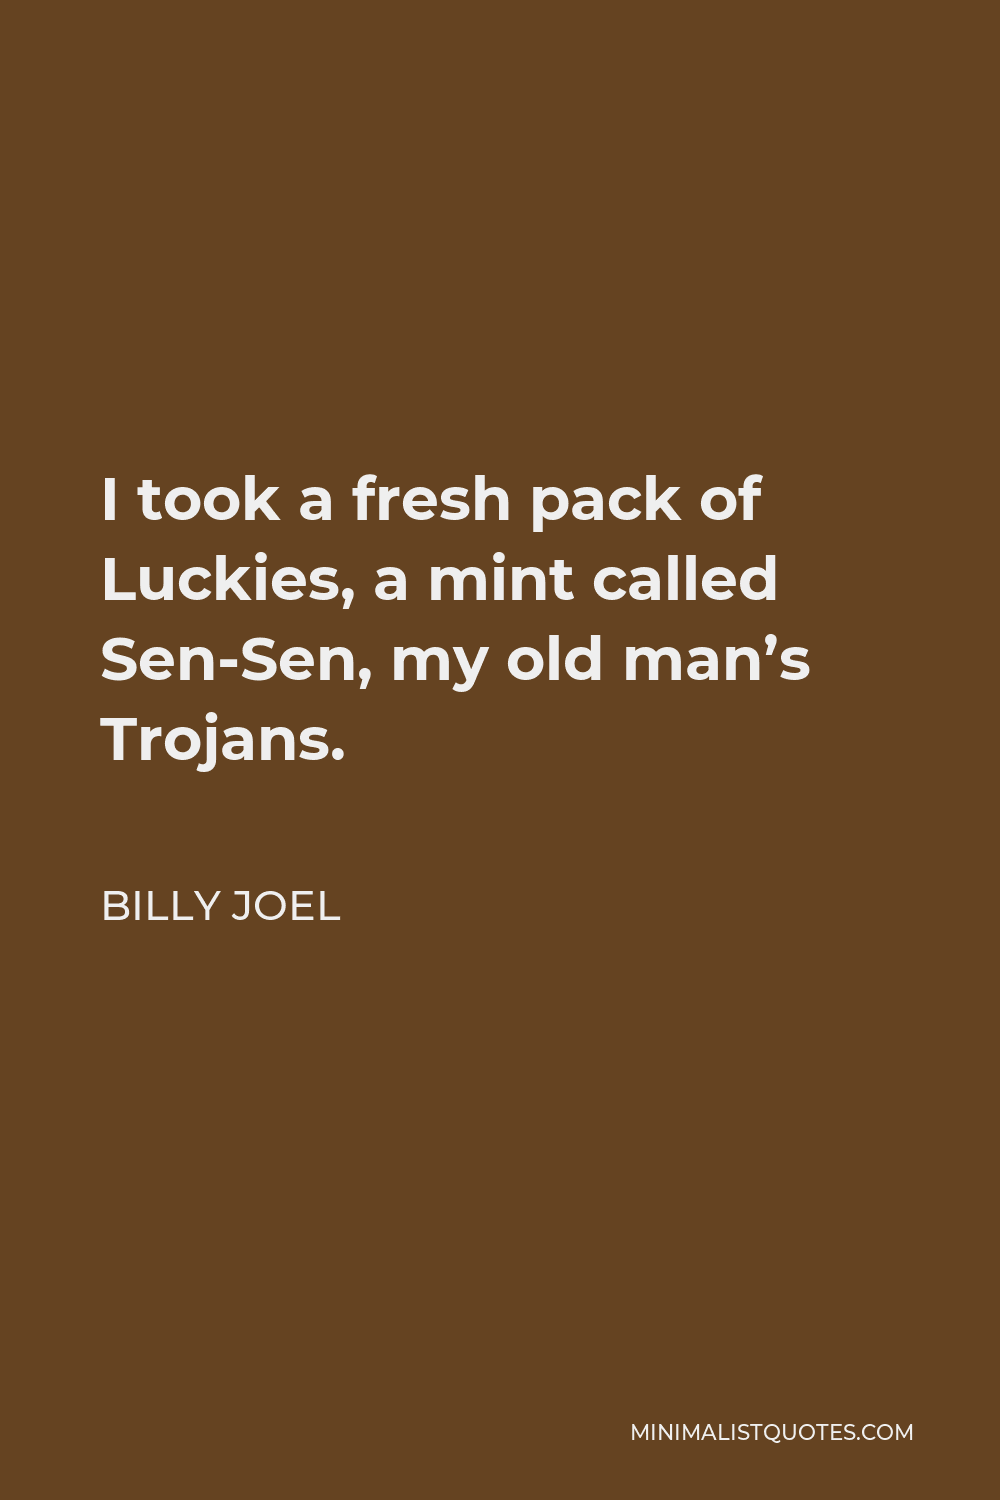 Billy Joel Quote - I took a fresh pack of Luckies, a mint called Sen-Sen, my old man’s Trojans.